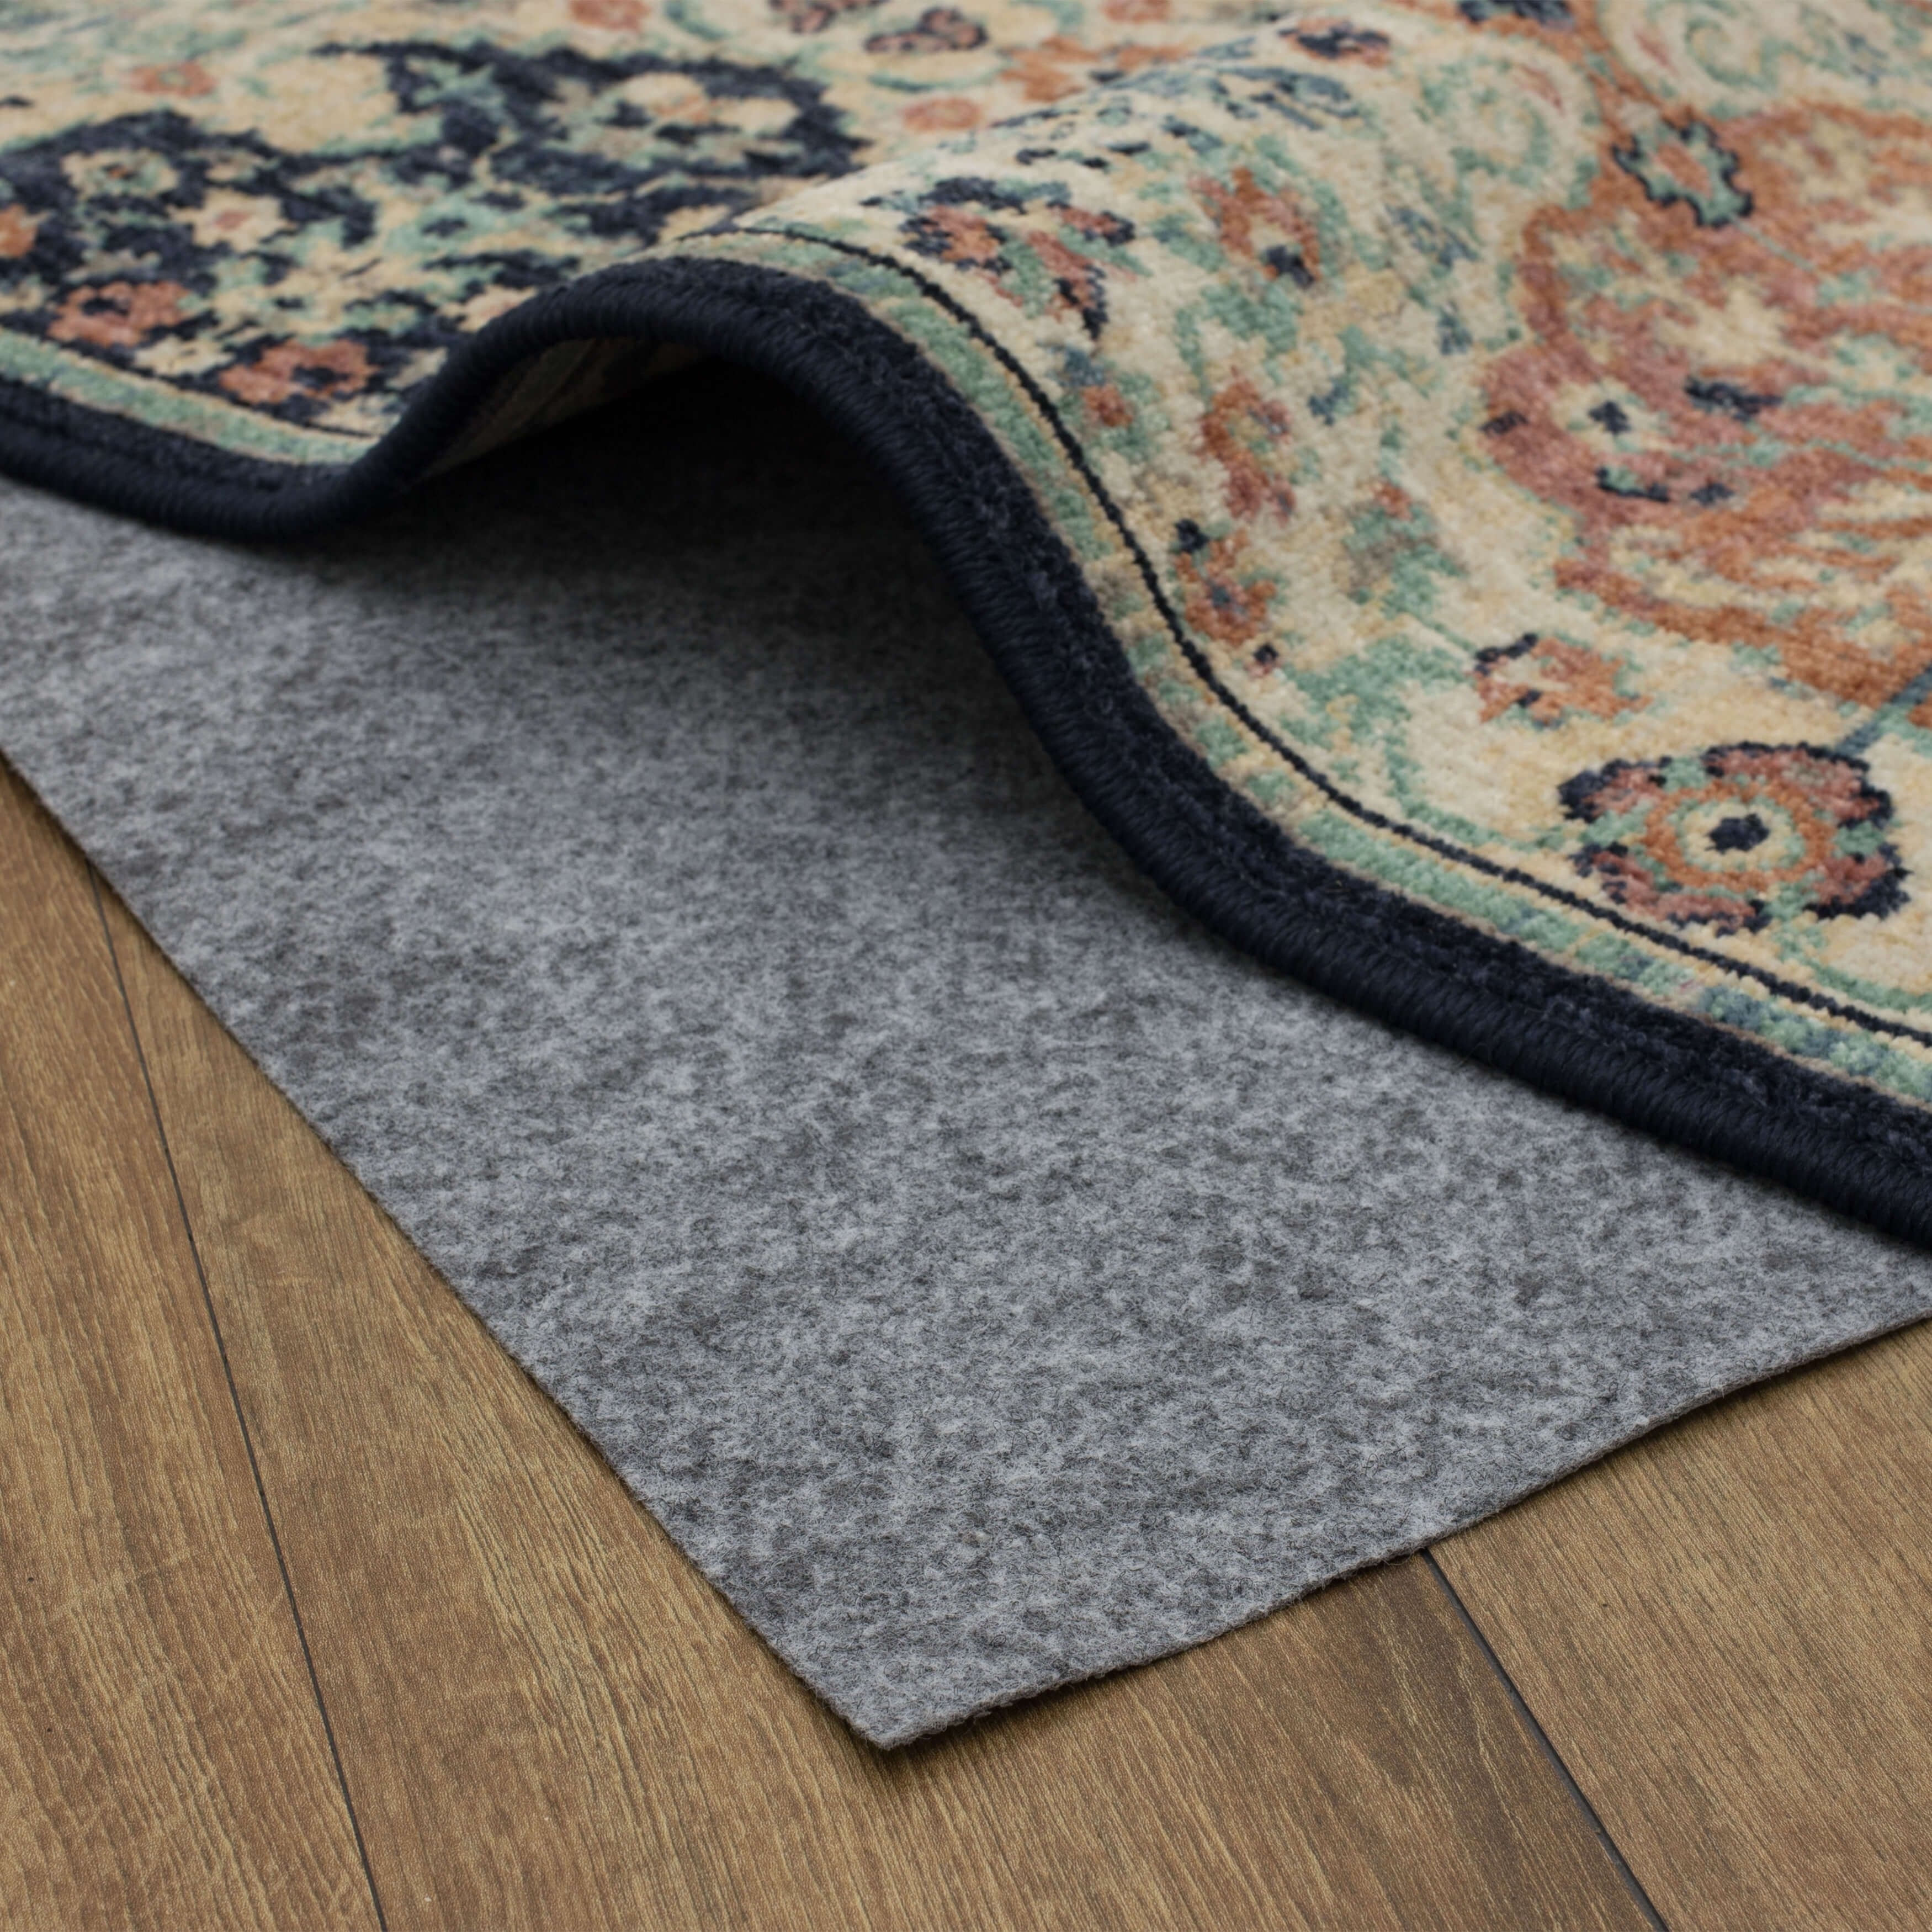 https://ak1.ostkcdn.com/images/products/is/images/direct/0c06d6d72ec27dbea7e915337a1c7cdc1e1a9e87/Mohawk-Home-Dual-Surface-Low-Profile-Rug-Pad.jpg